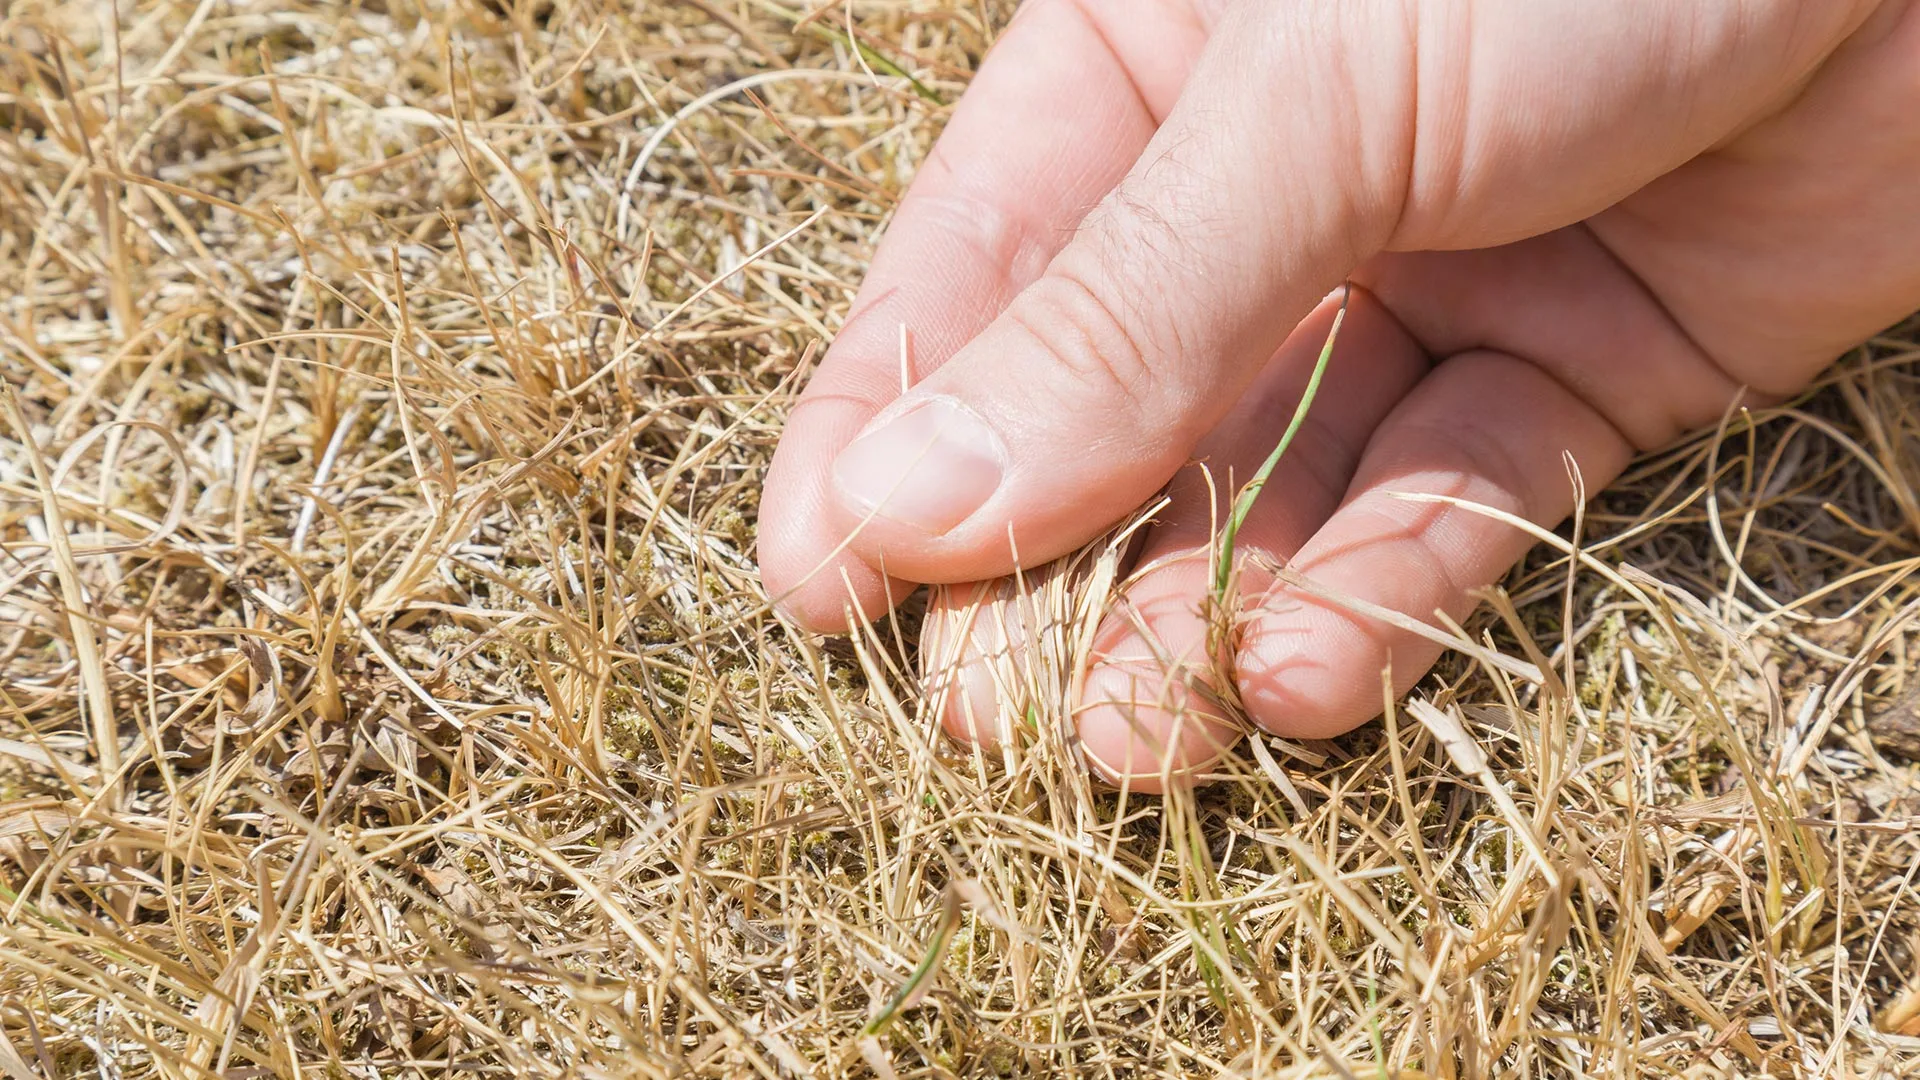 3 Lawn Diseases Guaranteed to Get You Fined by the HOA